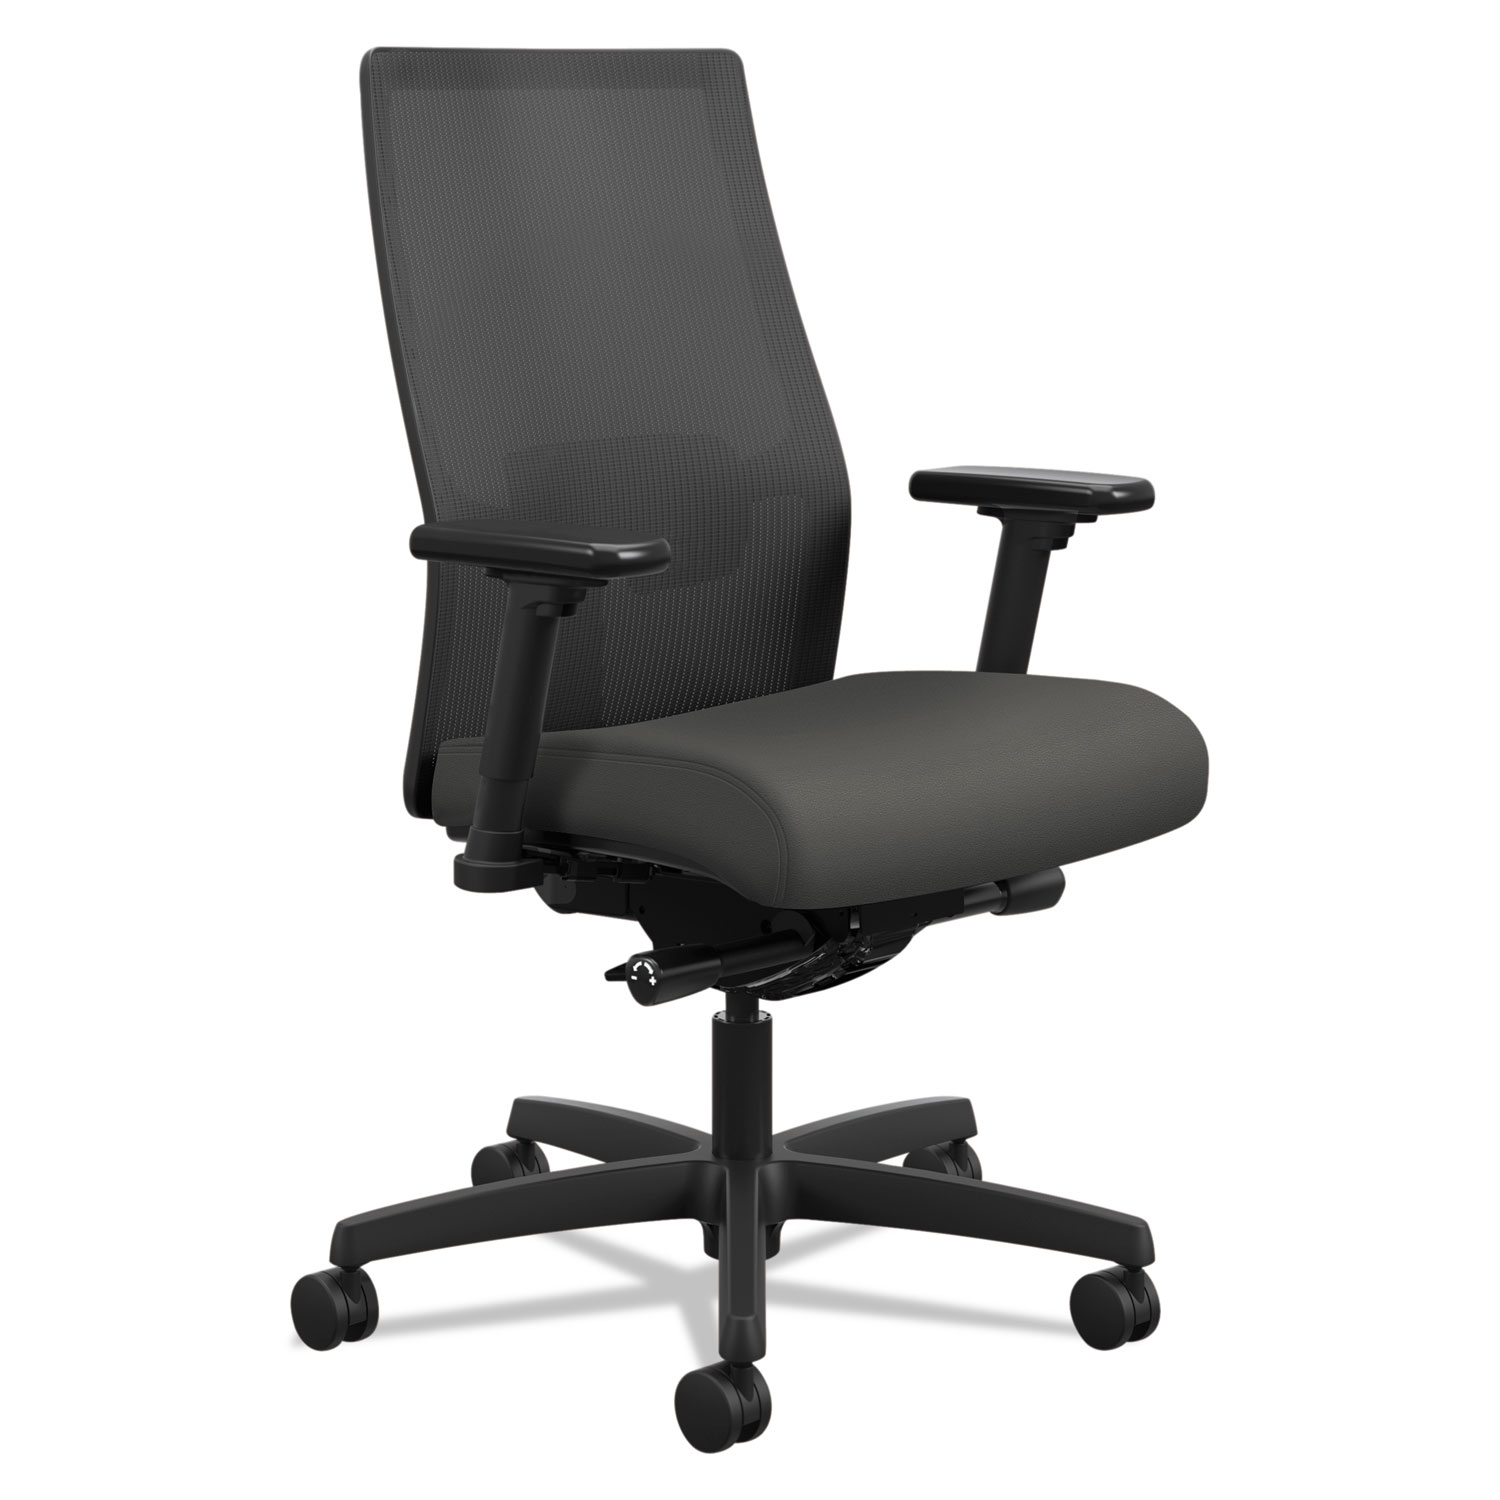  HON HONI2M2AMLC19TK Ignition 2.0 4-Way Stretch Mid-Back Mesh Task Chair, Supports up to 300 lbs., Iron Ore Seat, Black Back/Base (HONI2M2AMLC19TK) 